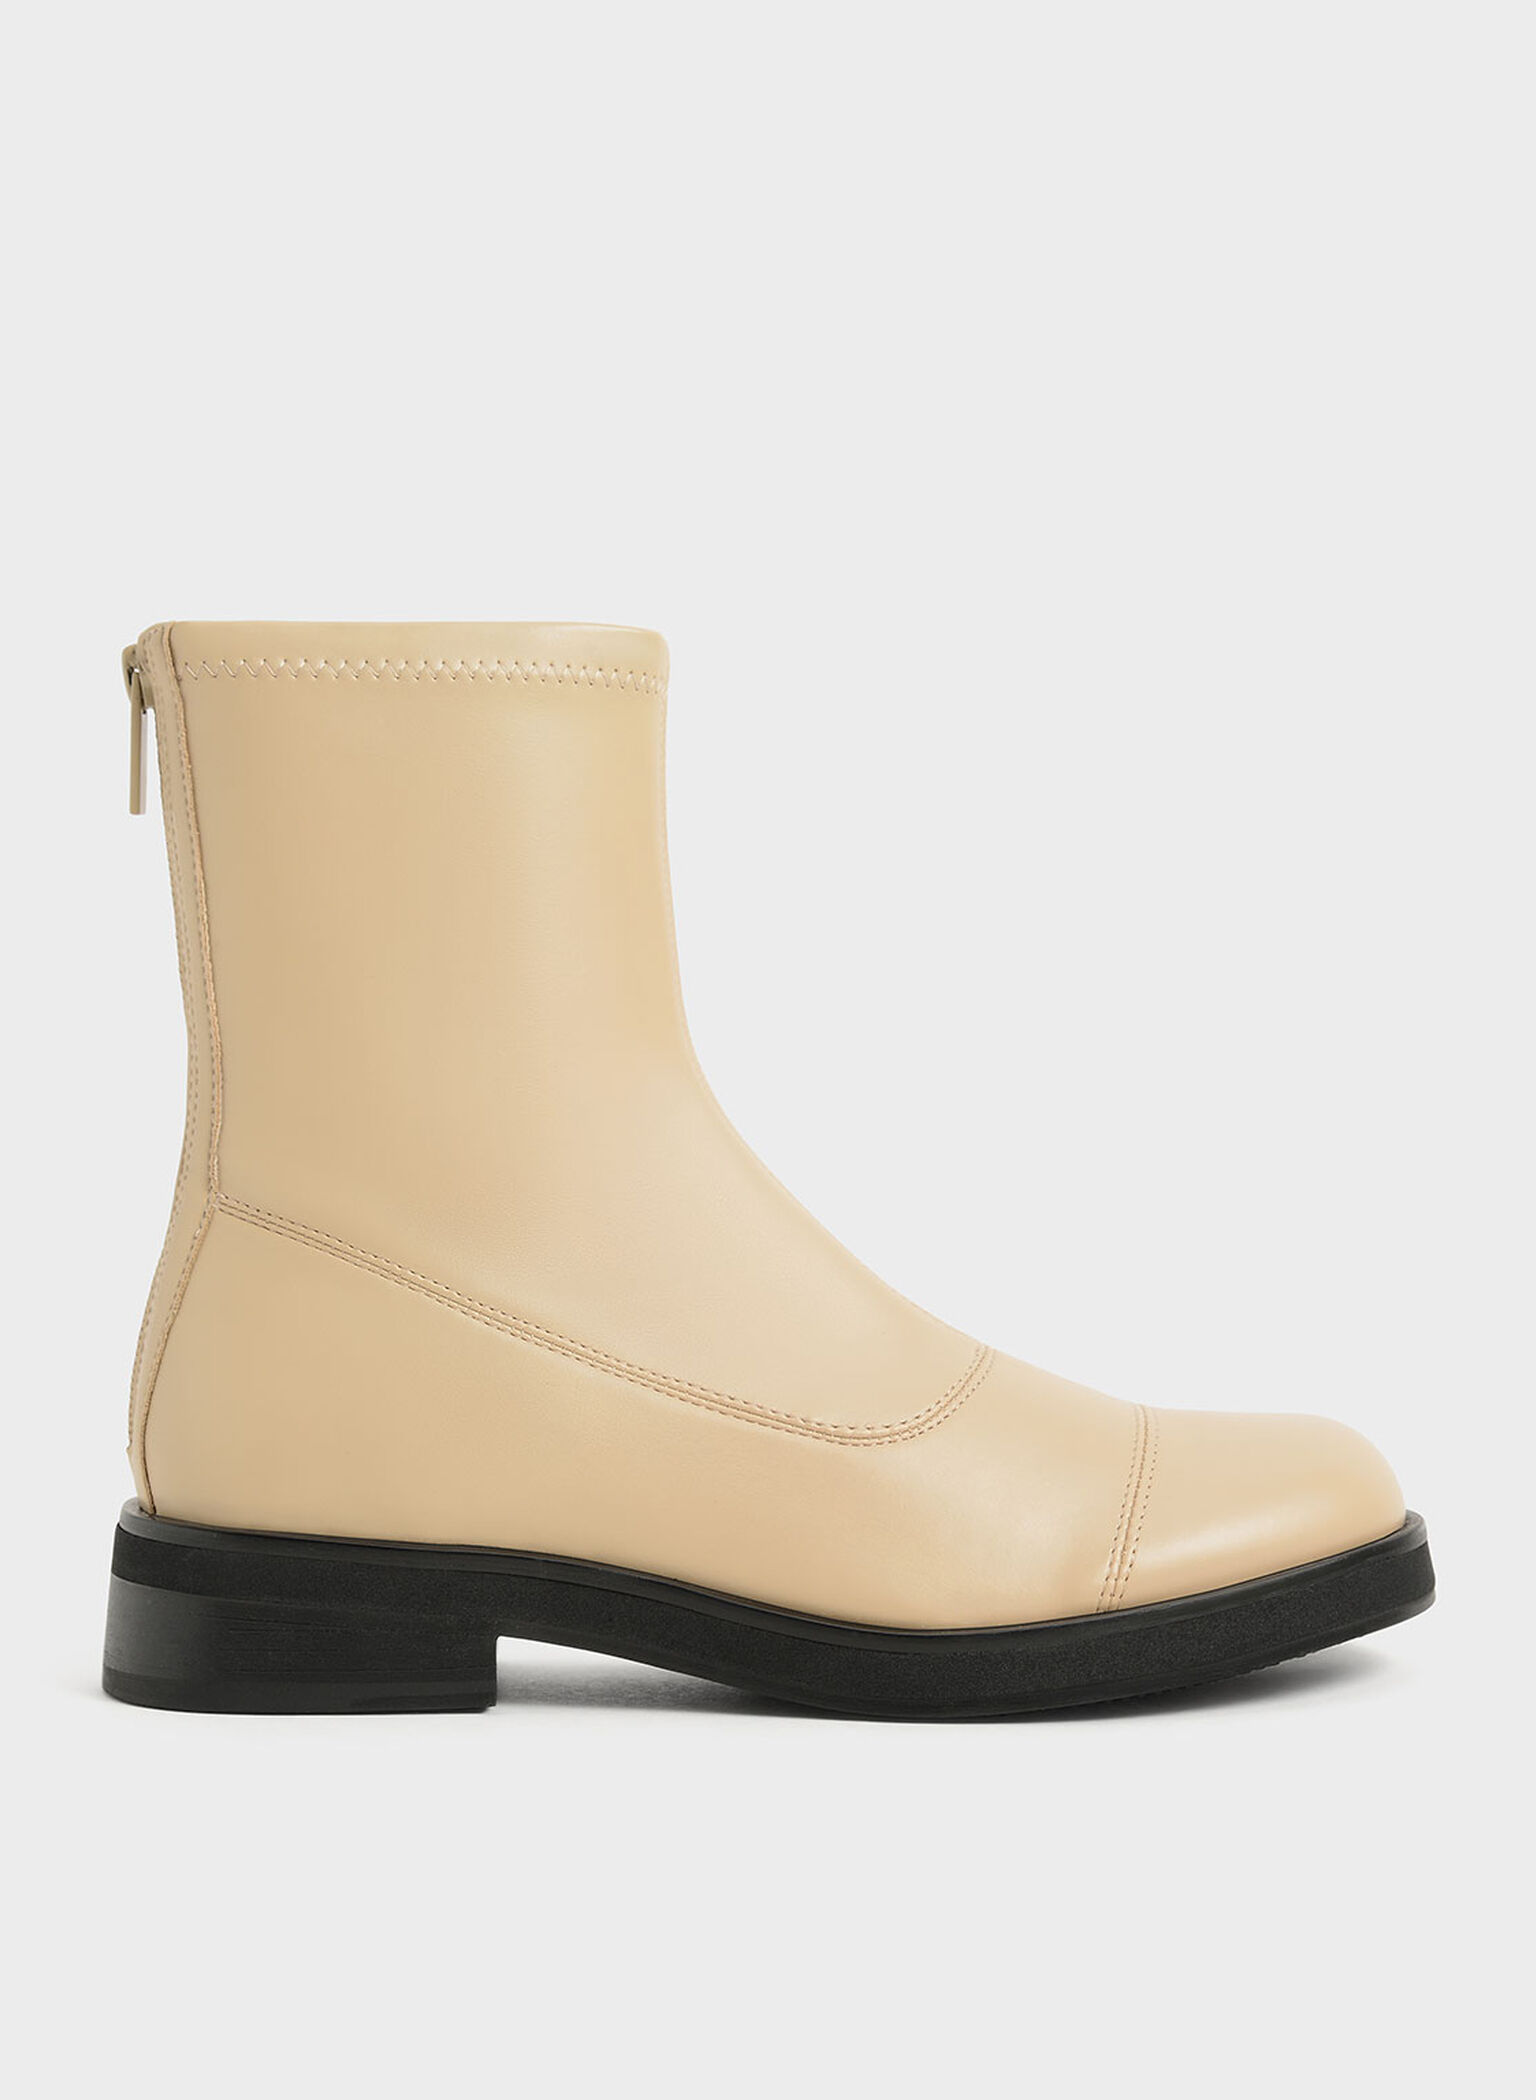 Round Toe Zip-Up Ankle Boots, Sand, hi-res